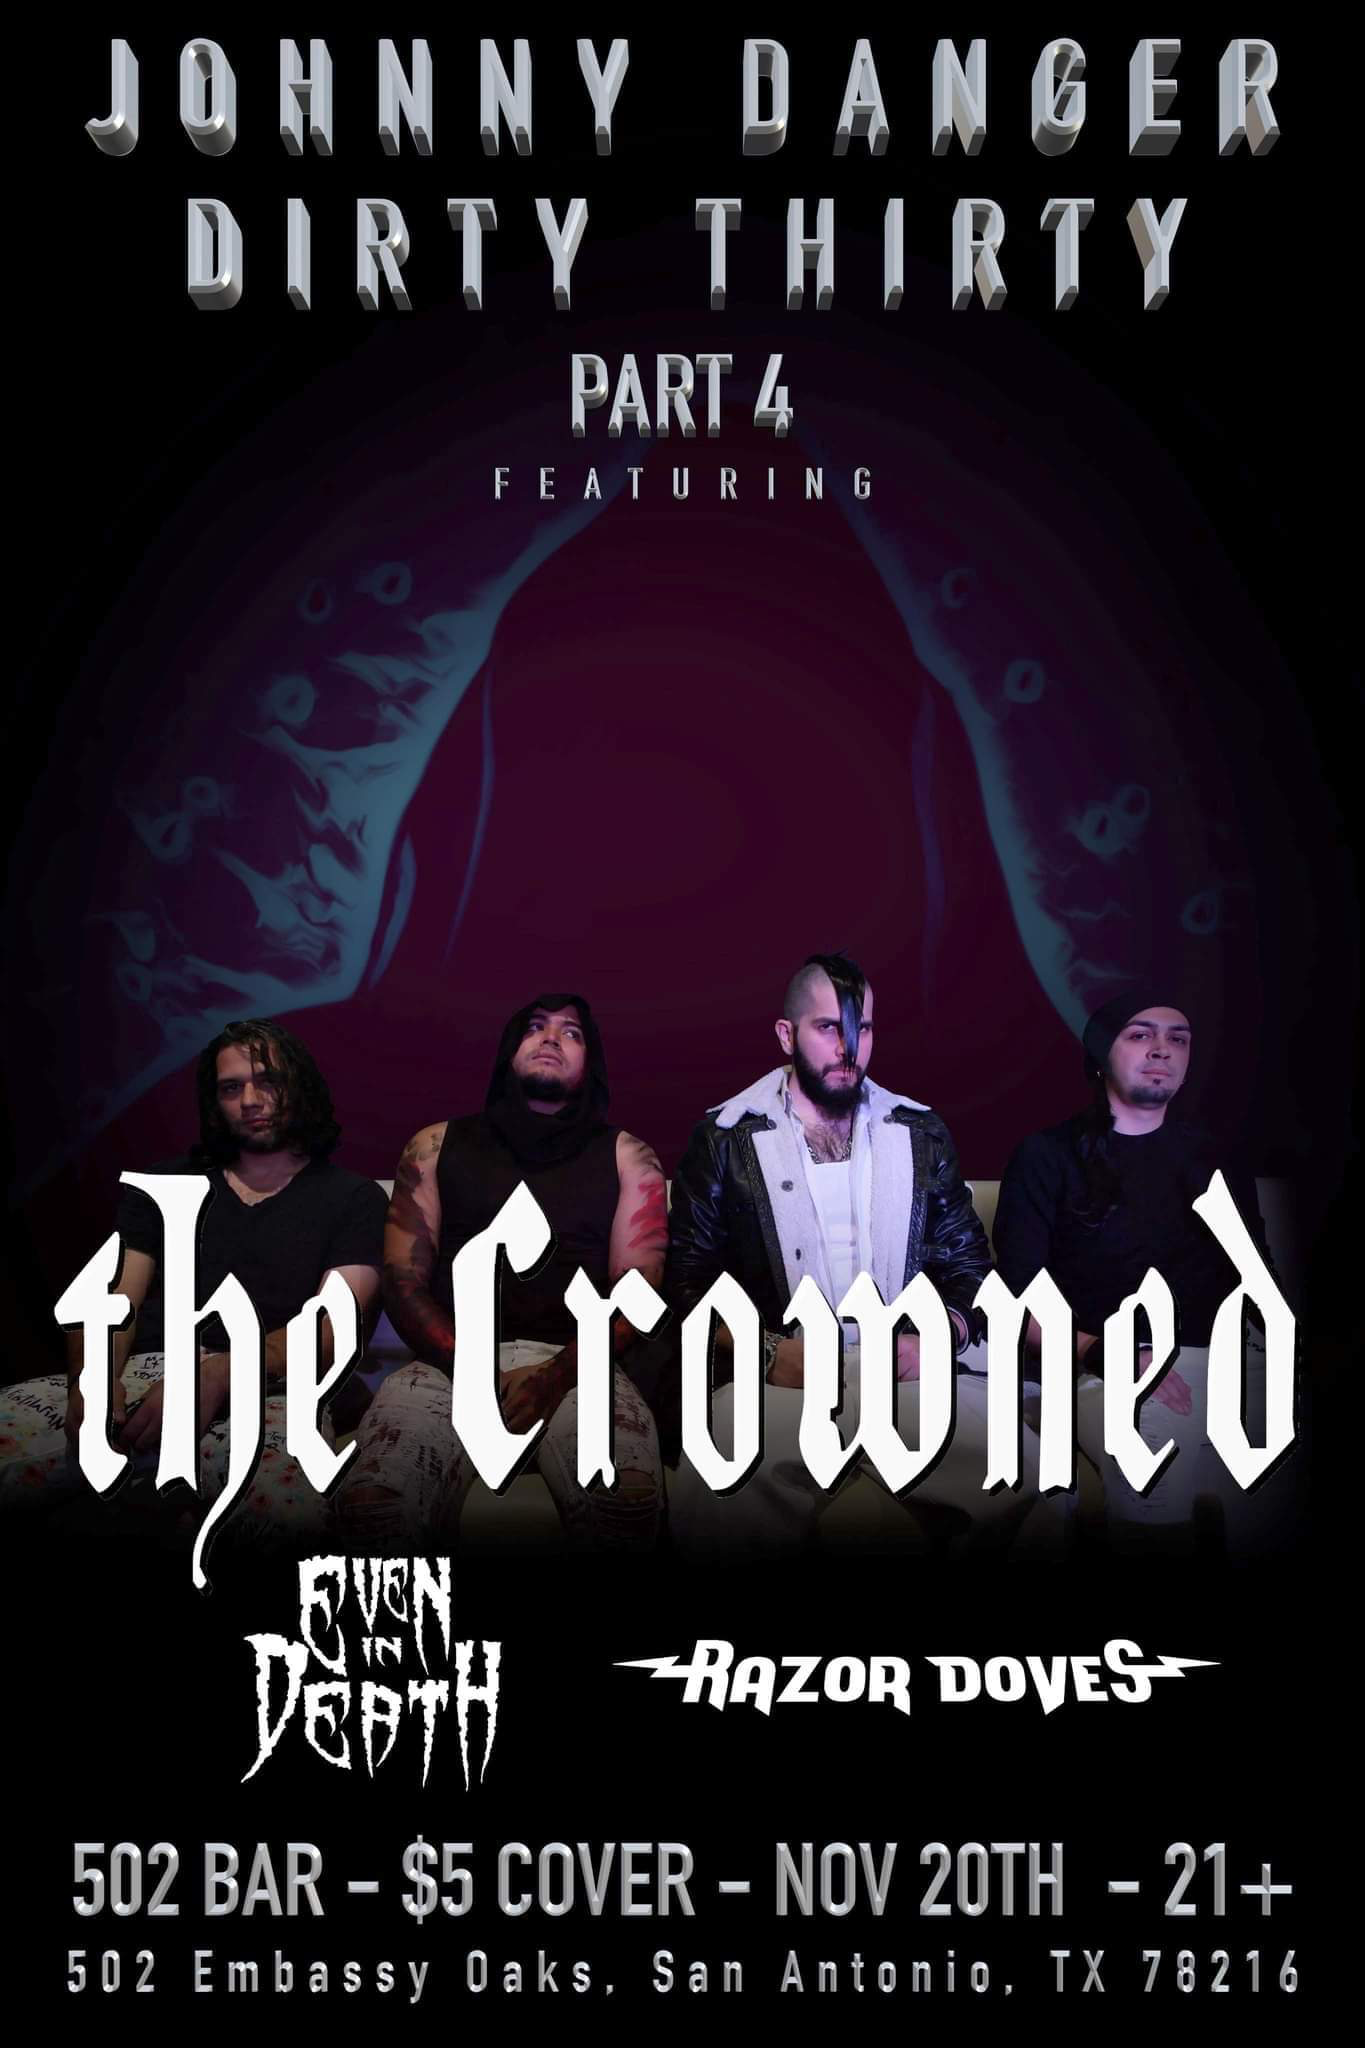 The Crowned, Even in Death, Razor Doves at 502 Bar San Antonio